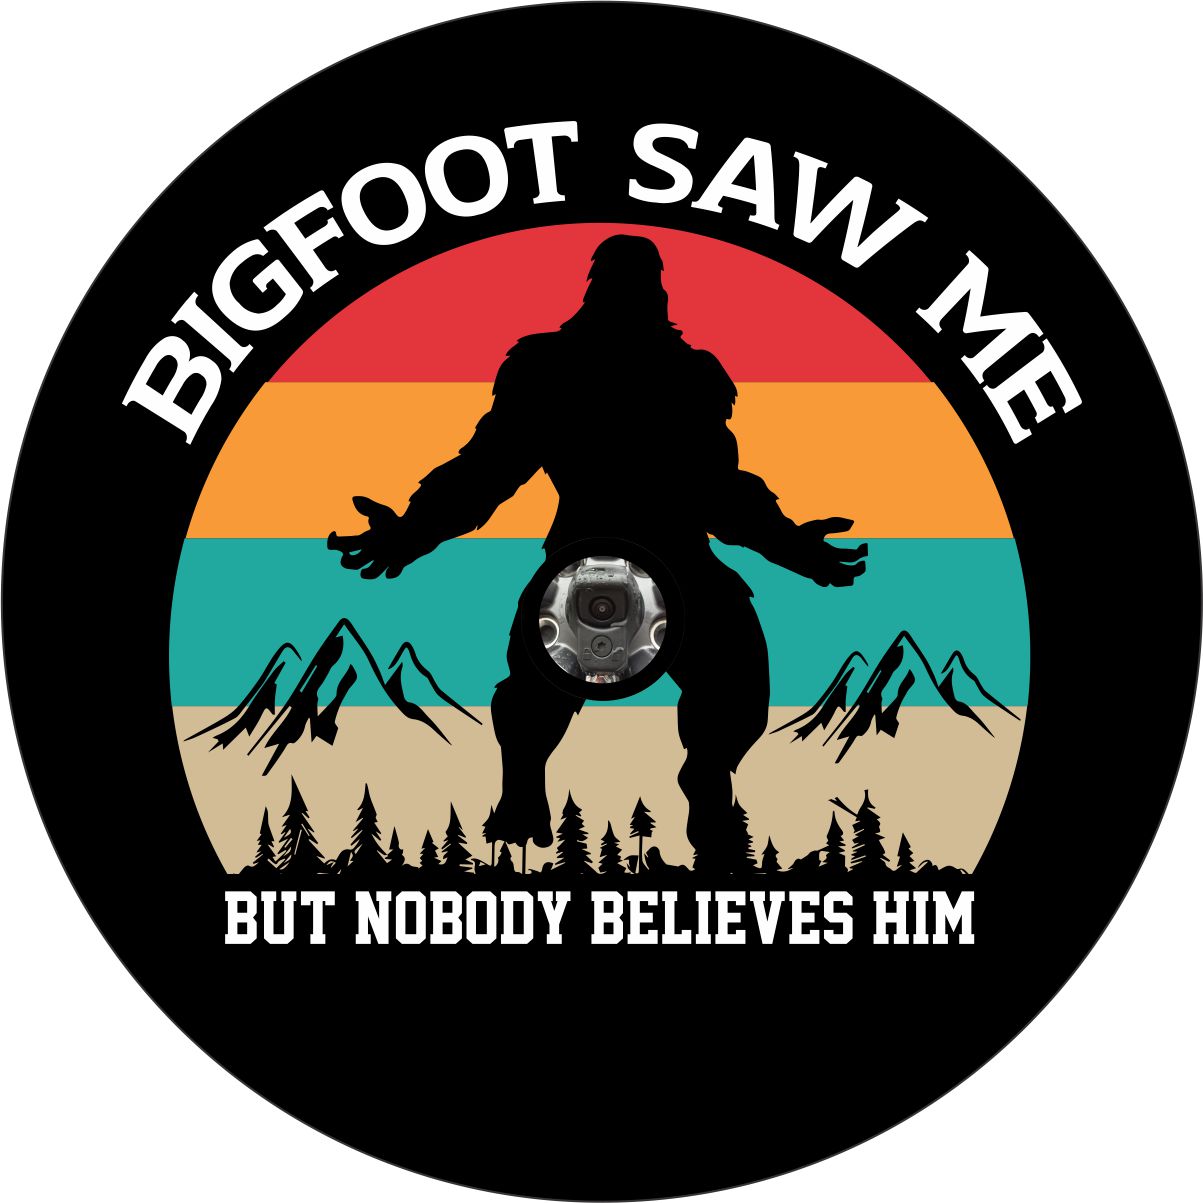 Mock up design of a vinyl spare tire cover for spare wheels with a back up camera hole needed with red, orange, turquoise, & tan stripes. Plus the silhouette of bigfoot or sasquatch and the saying that bigfoot saw me but nobody believe him.